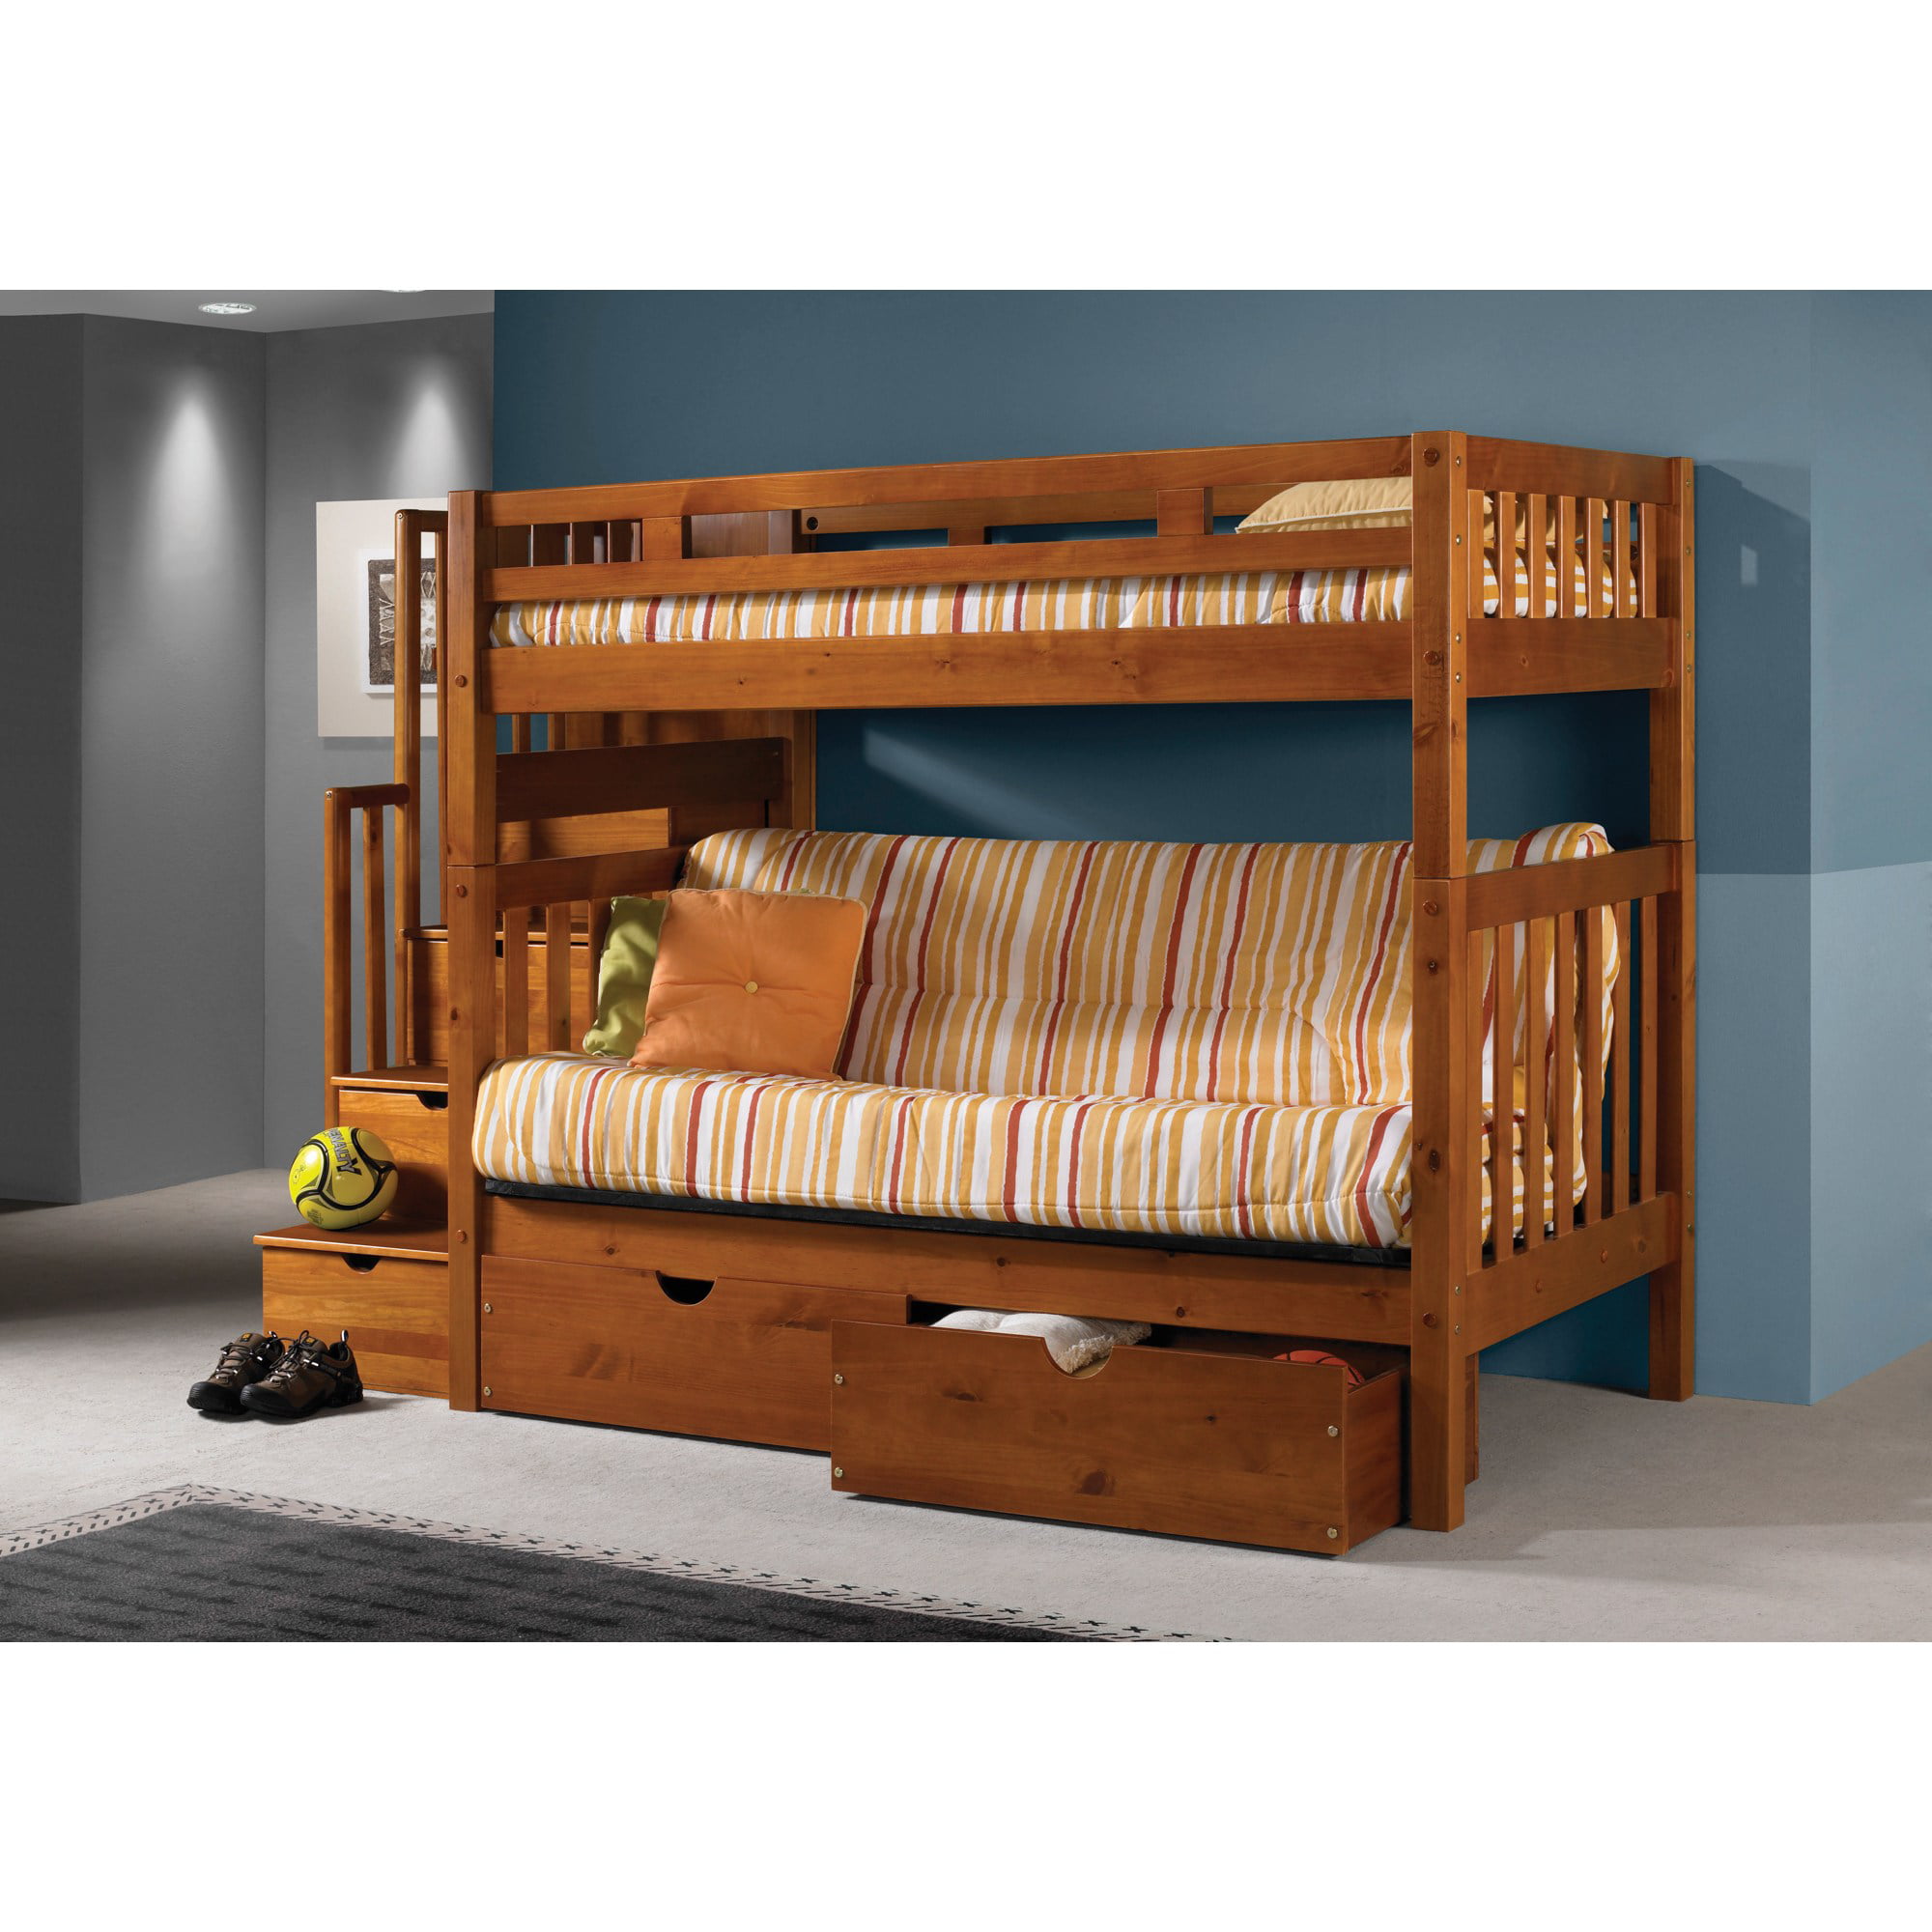 Tall Twin Over Futon Mission Stairway, Bunk Bed Tall